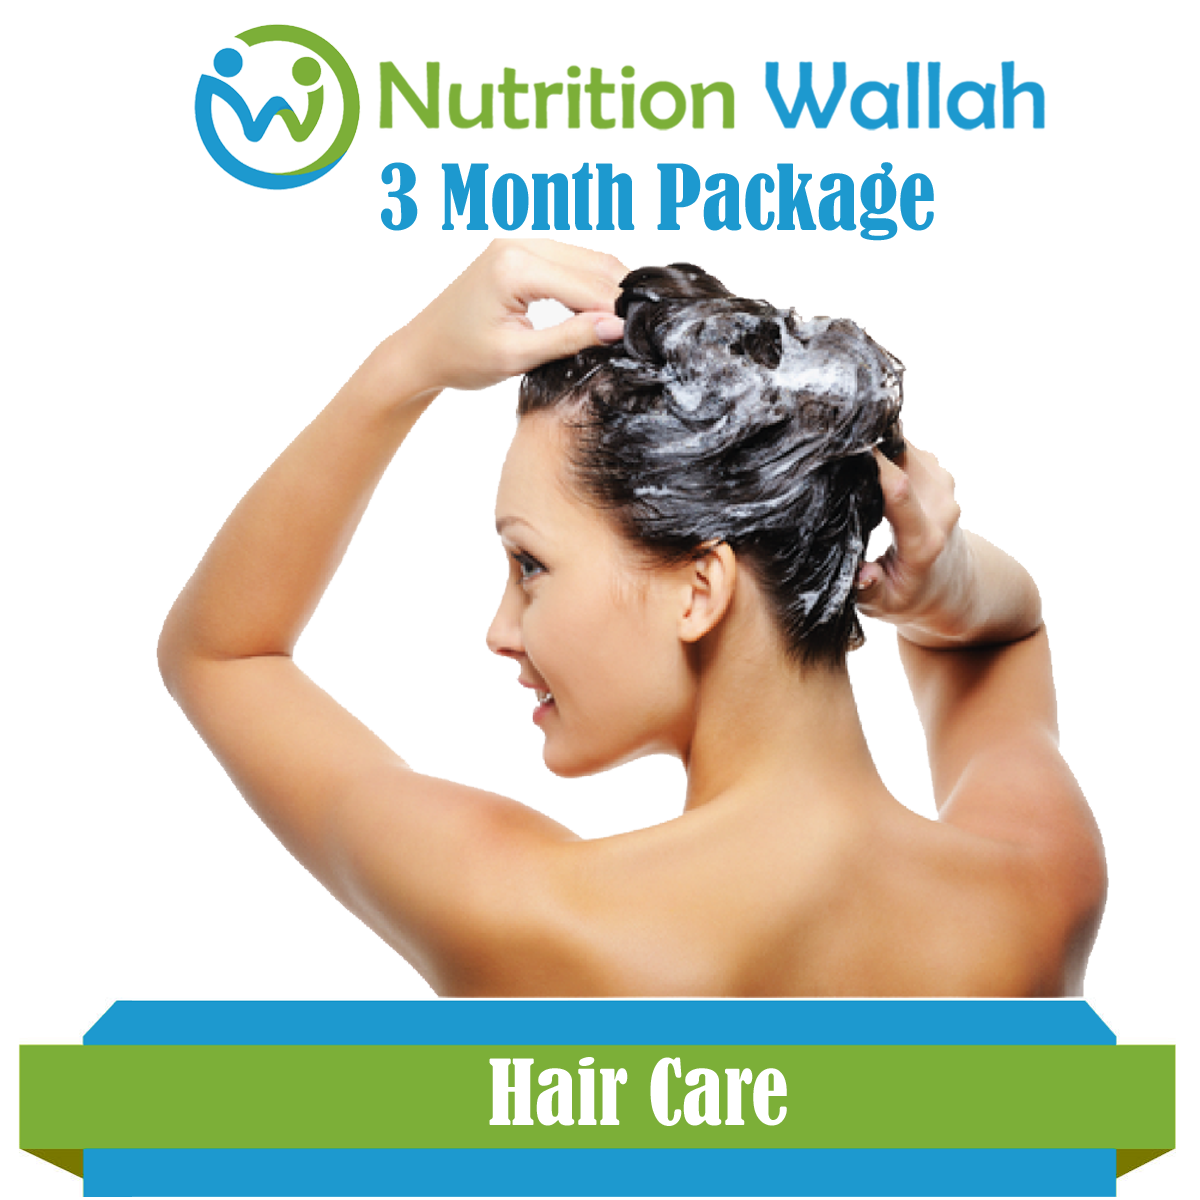 3 Month Package Hair Care